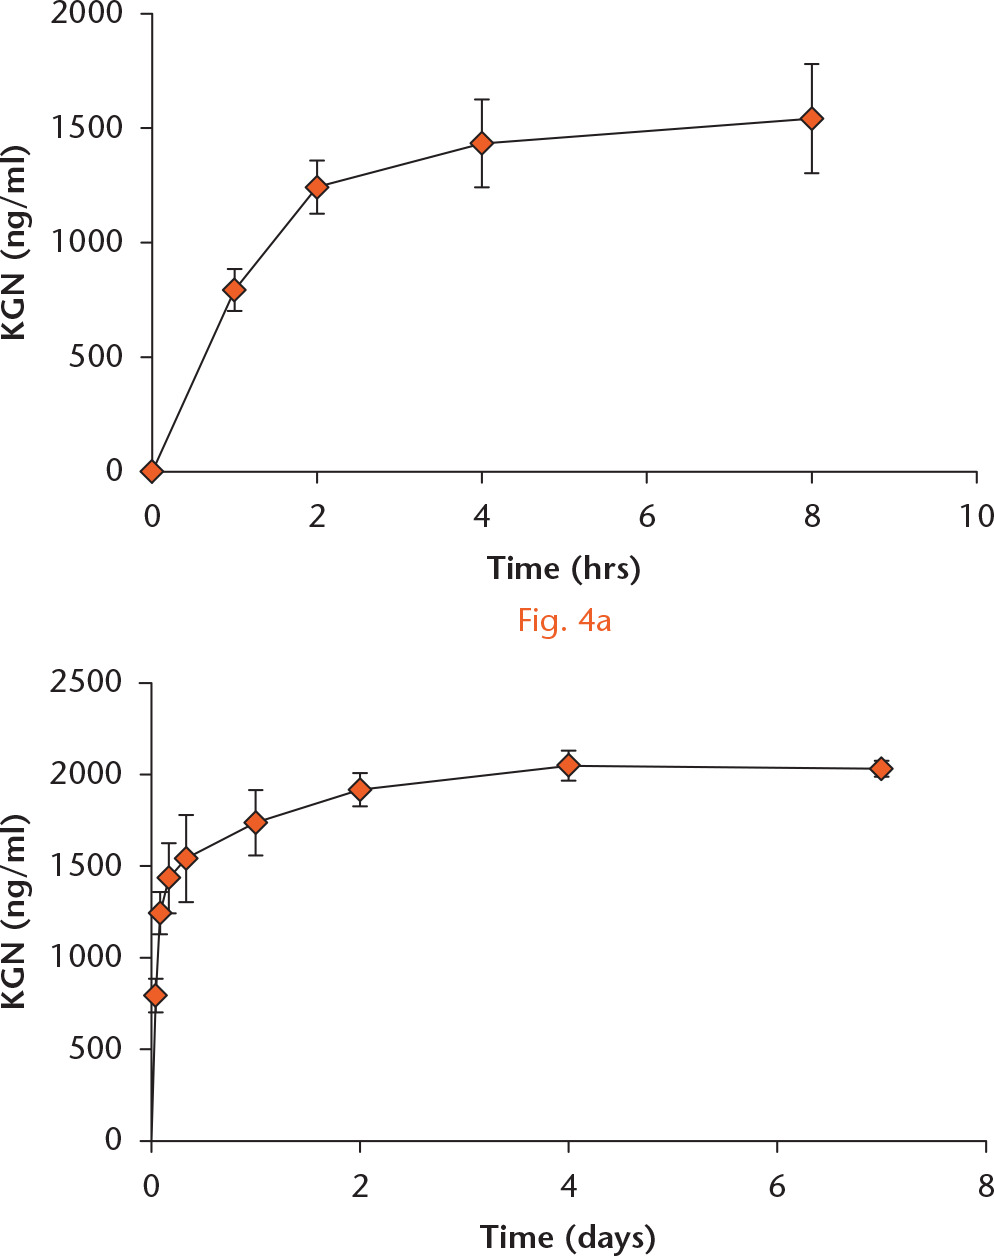  
          Kartogenin (KGN) release kinetics from KGN- PRP gel in vitro. a) The time course of KGN release, measured by HPLC chromatographs, in the initial eight hours in vitro. b) Release of KGN from KGN-PRP gel during seven days in vitro. KGN-PRP gels were individually placed in PBS at 37°C and an aliquot of the solution was removed at the indicated time points to measure the amount of KGN released into the phosphate-buffered solution (PBS). It is evident that > 90% of KGN was released within the first eight hours.
        